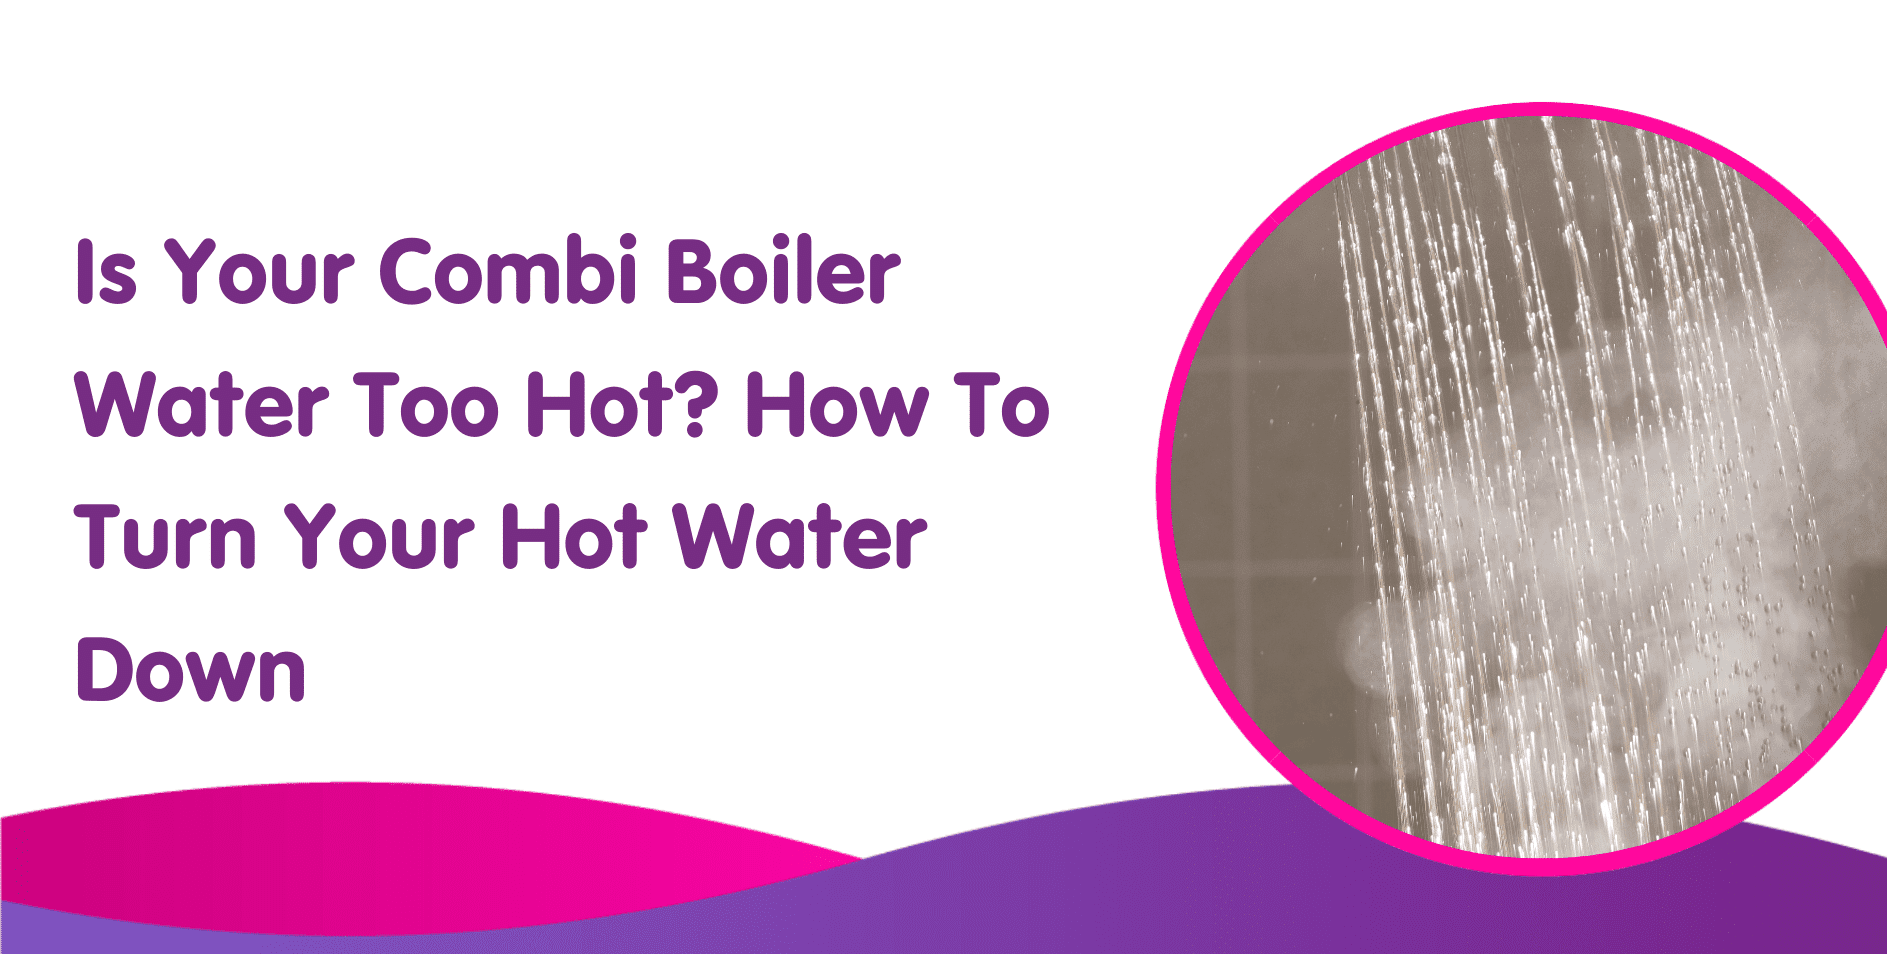 Is Your Combi Boiler Water Too Hot? How To Turn Your Hot Water Down